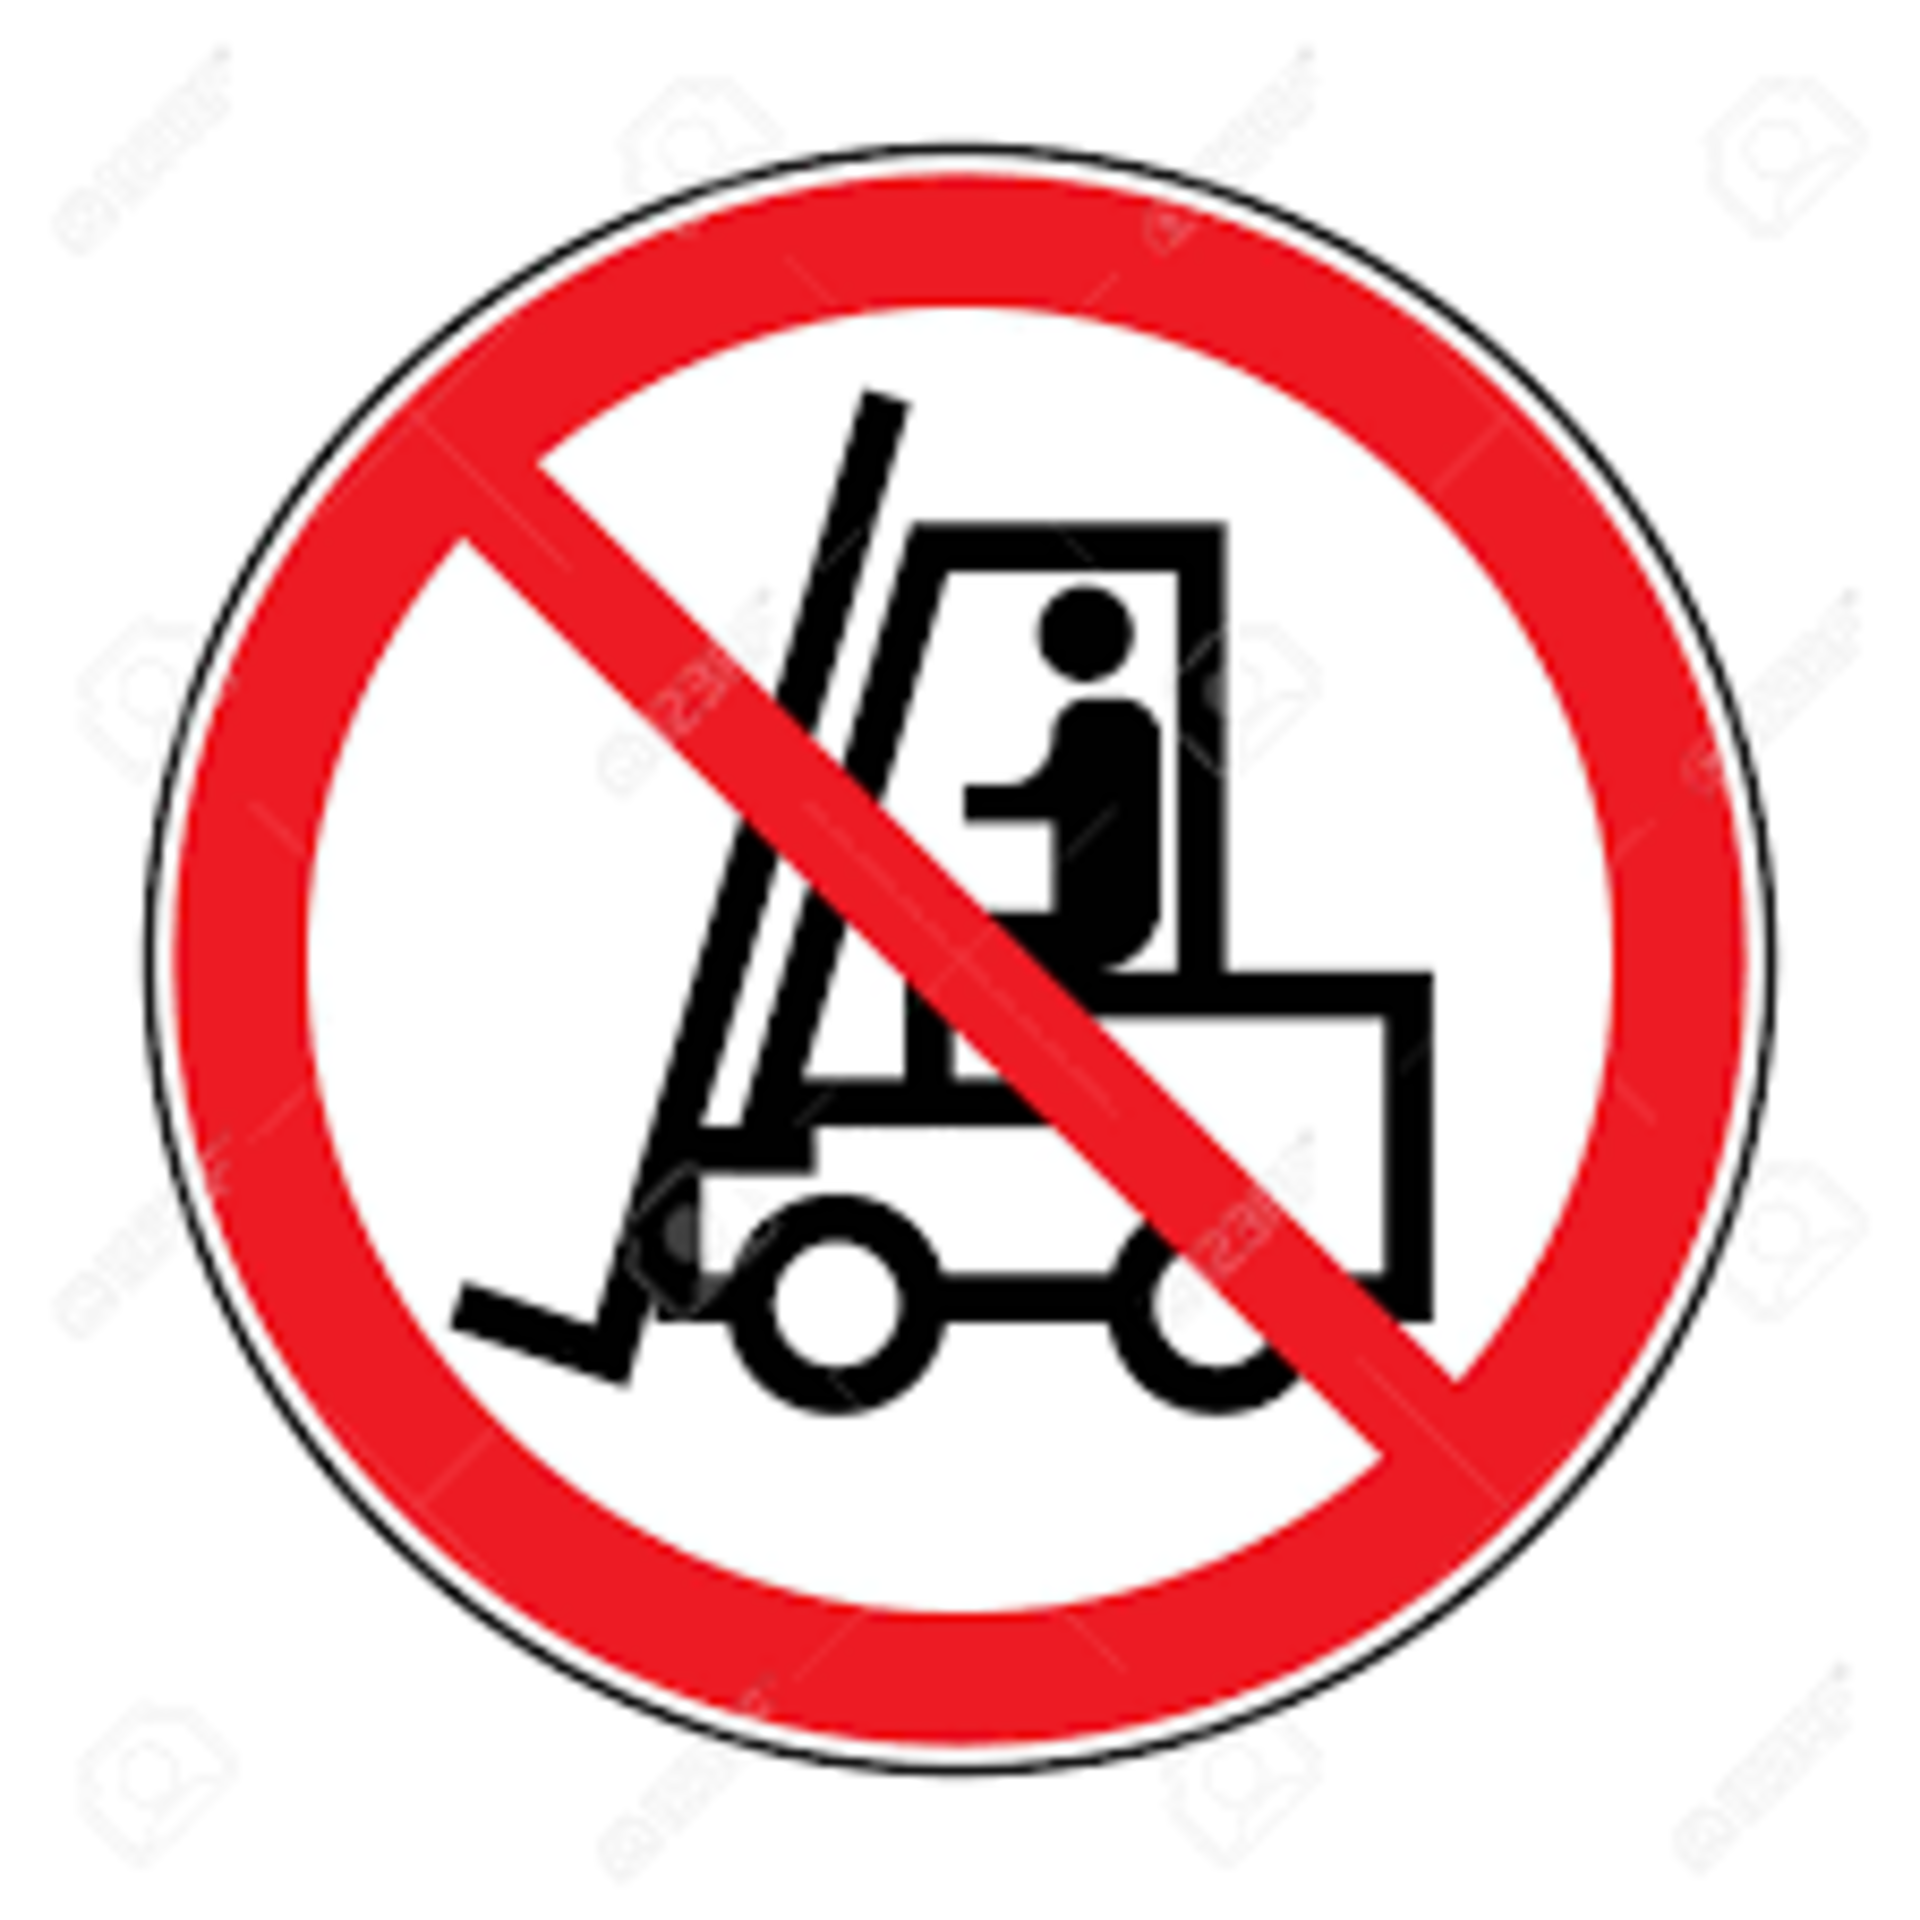 There will NOT be a forklift available for loading your purchases